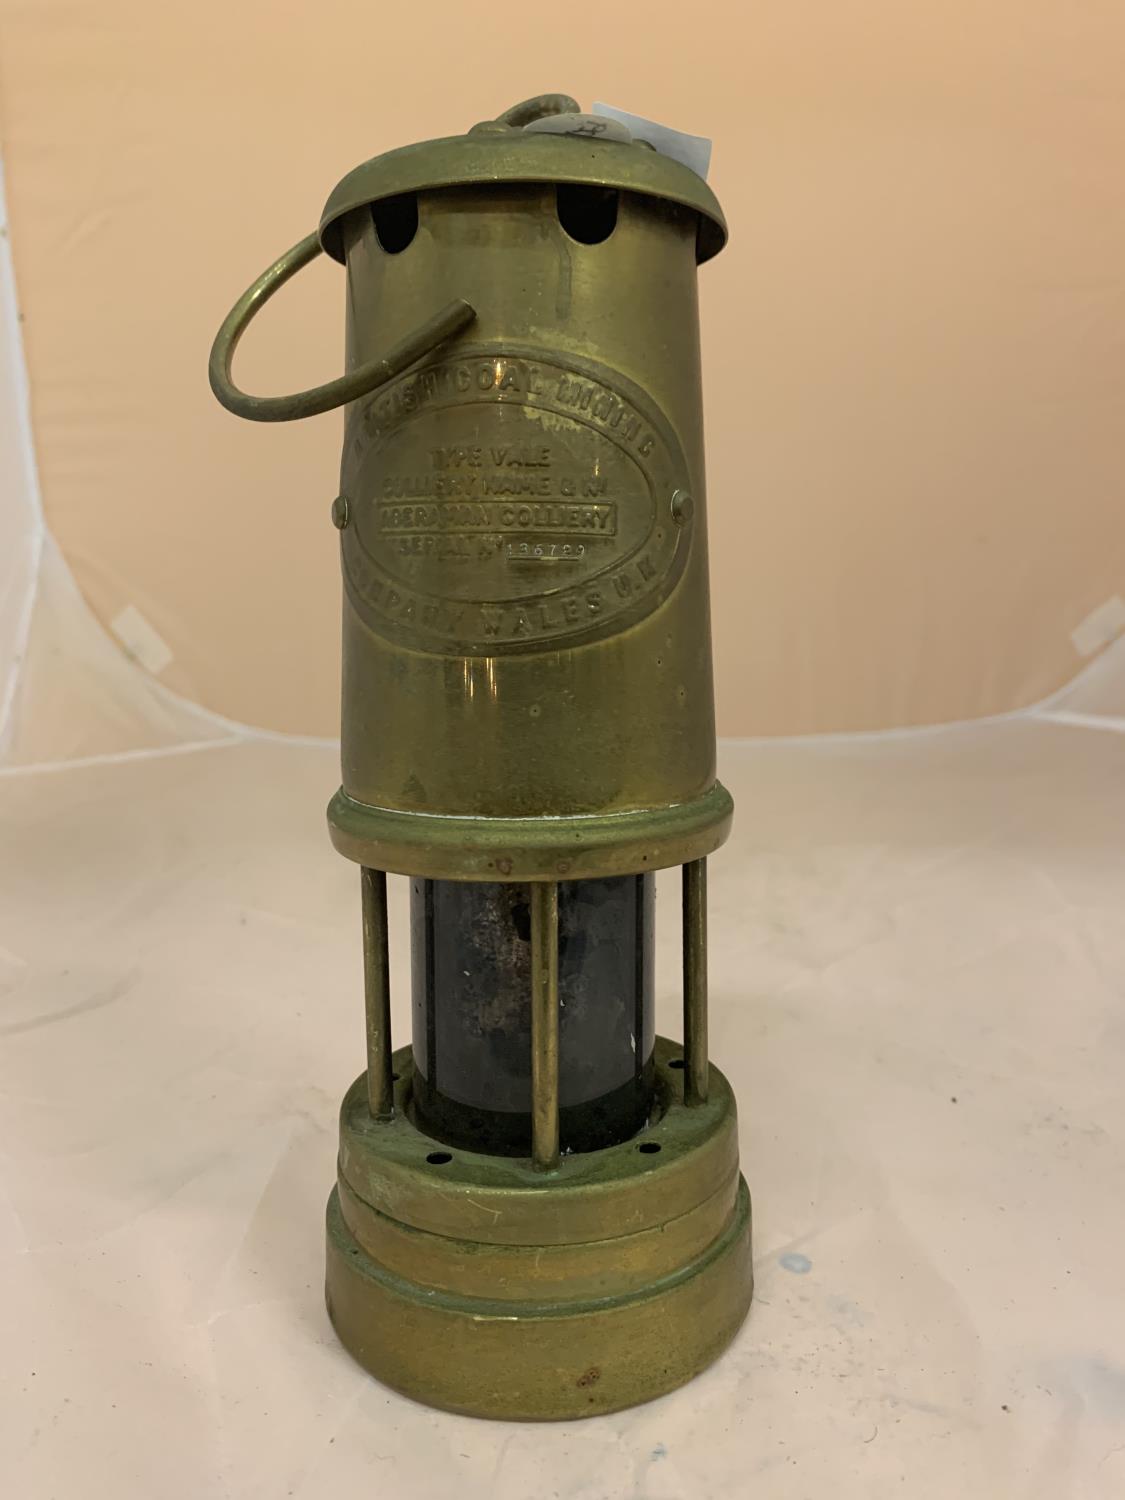 A VINTAGE MINERS LAMP 'BRITISH COAL MINING COMPANY WALES UK ABERAMAN COLLIERY SERIAL NO 136729